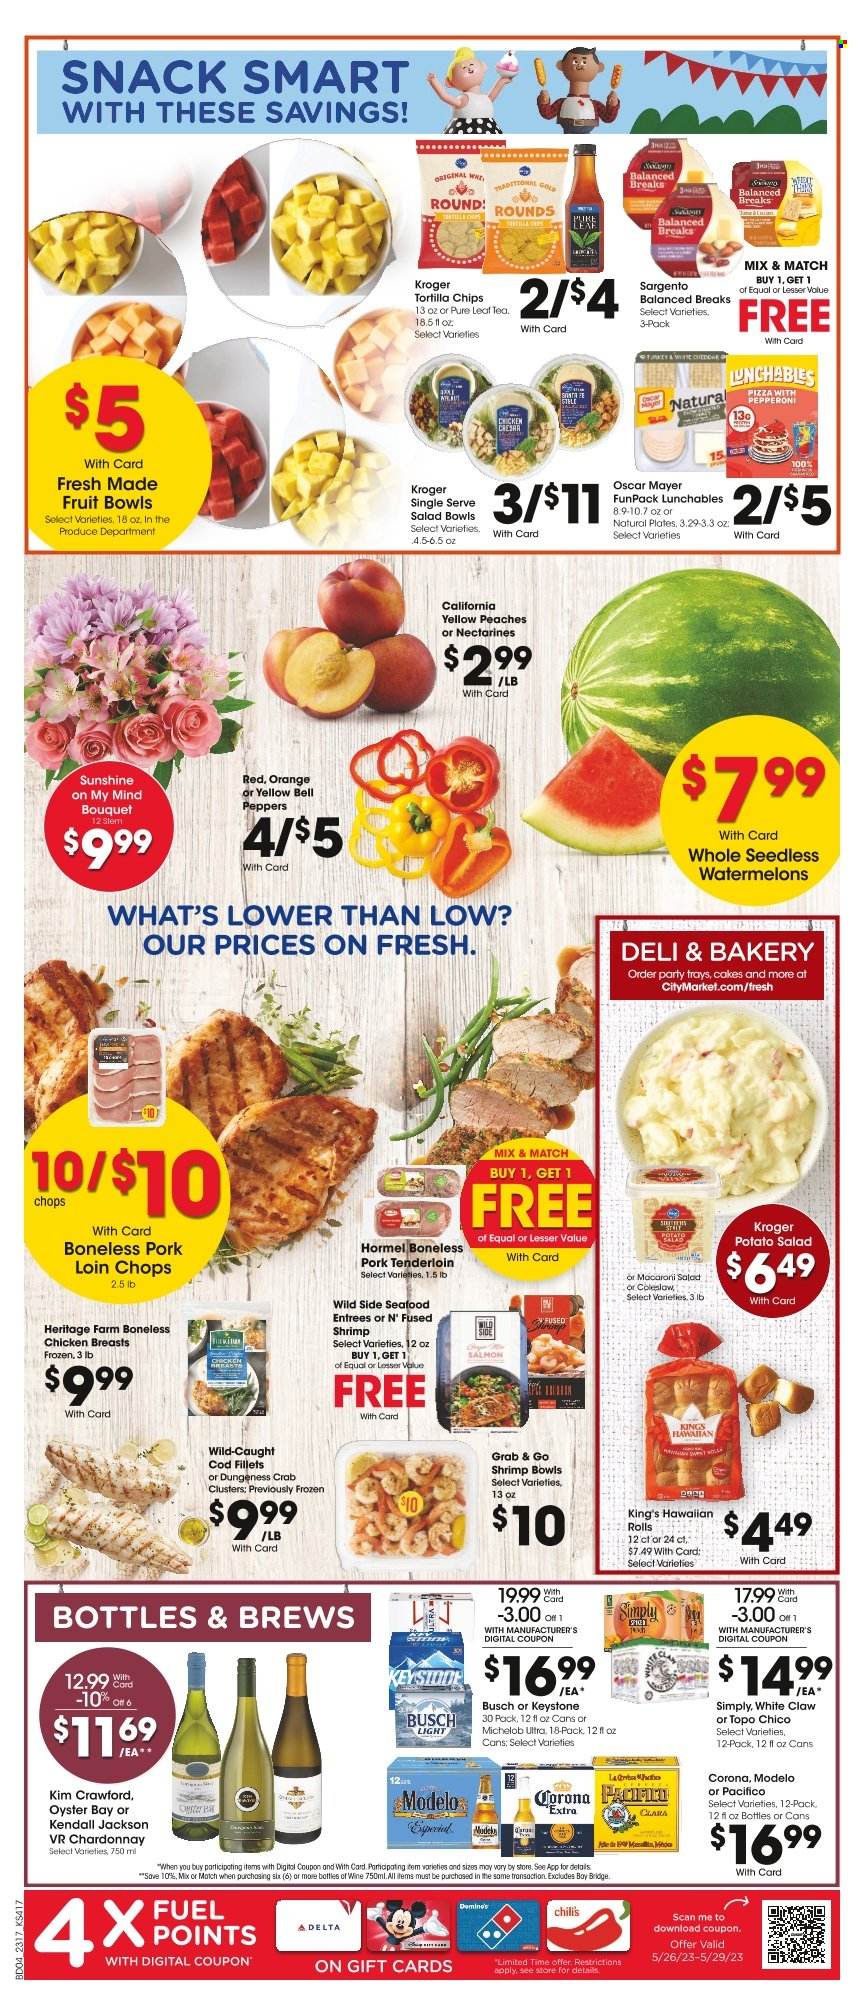 thumbnail - City Market Flyer - 05/24/2023 - 05/30/2023 - Sales products - bread, cake, hawaiian rolls, bell peppers, peppers, red peppers, watermelon, fruit cup, peaches, cod, oysters, seafood, crab, shrimps, crab clusters, coleslaw, Lunchables, Hormel, Oscar Mayer, pepperoni, potato salad, macaroni salad, cheese, Sargento, Sunshine, snack, tortilla chips, ice tea, sparkling water, Pure Leaf, white wine, Chardonnay, wine, alcohol, Kim Crawford, White Claw, beer, Busch, Corona Extra, Keystone, Modelo, Topo Chico, chicken breasts, chicken, turkey, pork chops, pork loin, pork meat, pork tenderloin, plate, salad bowl, bouquet, nectarines, Michelob. Page 5.